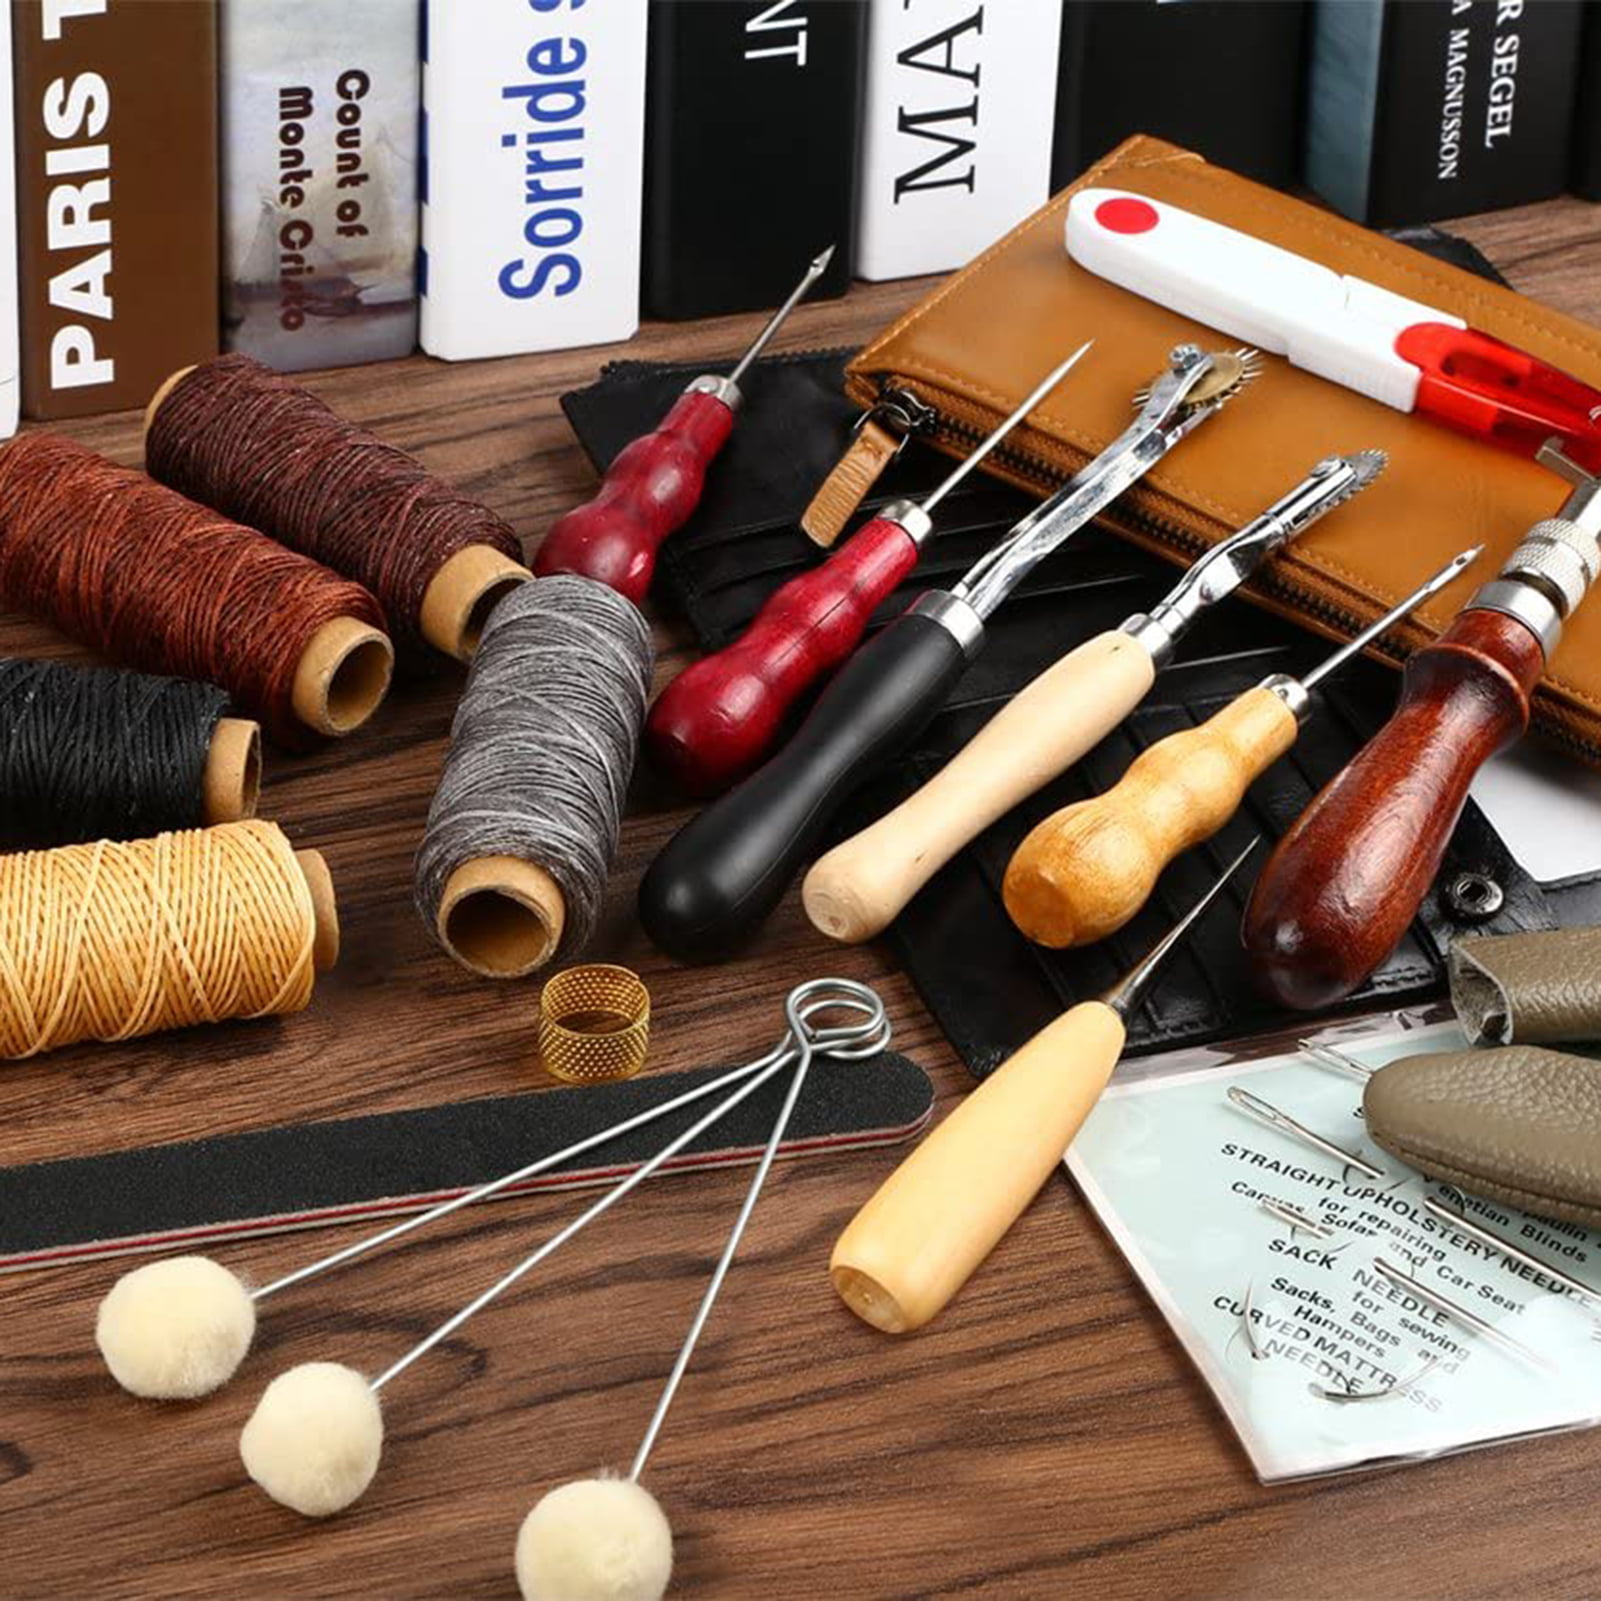 Craft tools hand-stitched stitching leather stamped perforated side tapered  set